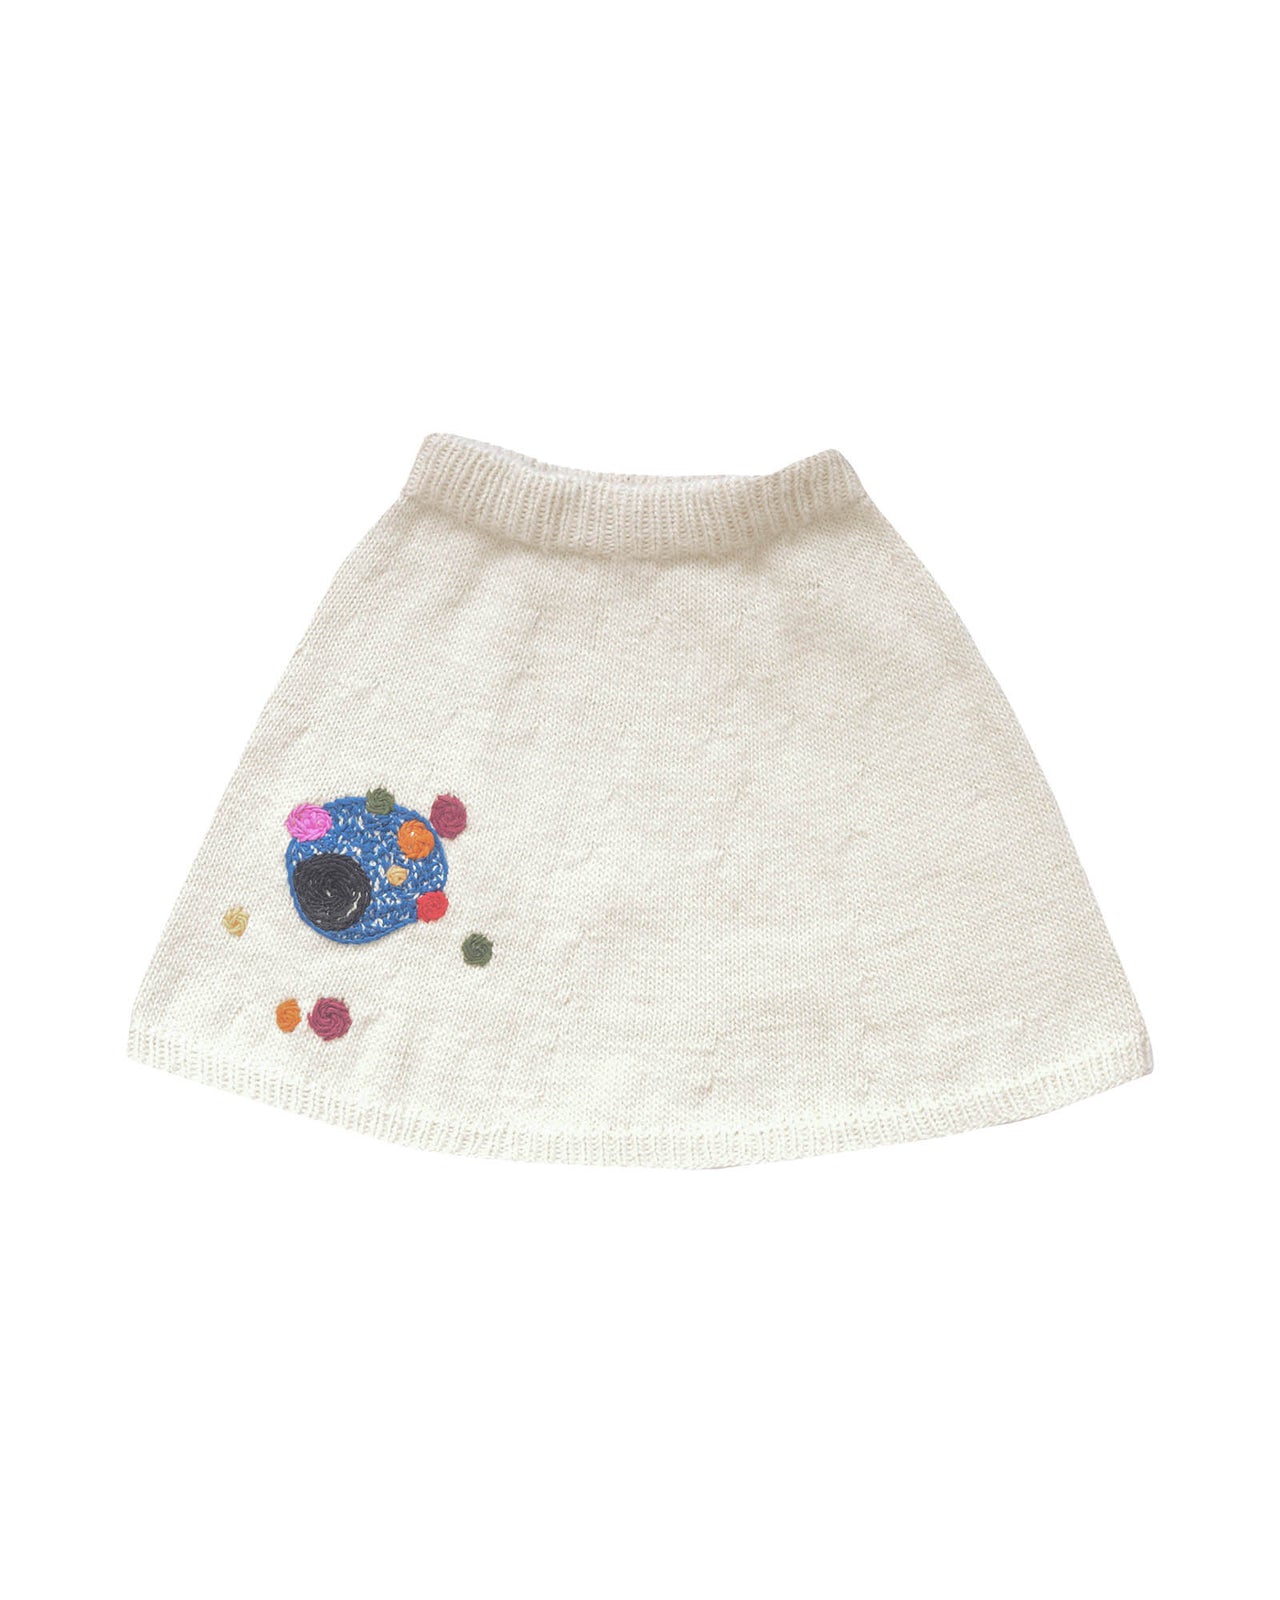 White wool skirt laid flat on white background. The skirt has colourful bubble-like embroideries on the right leg. 